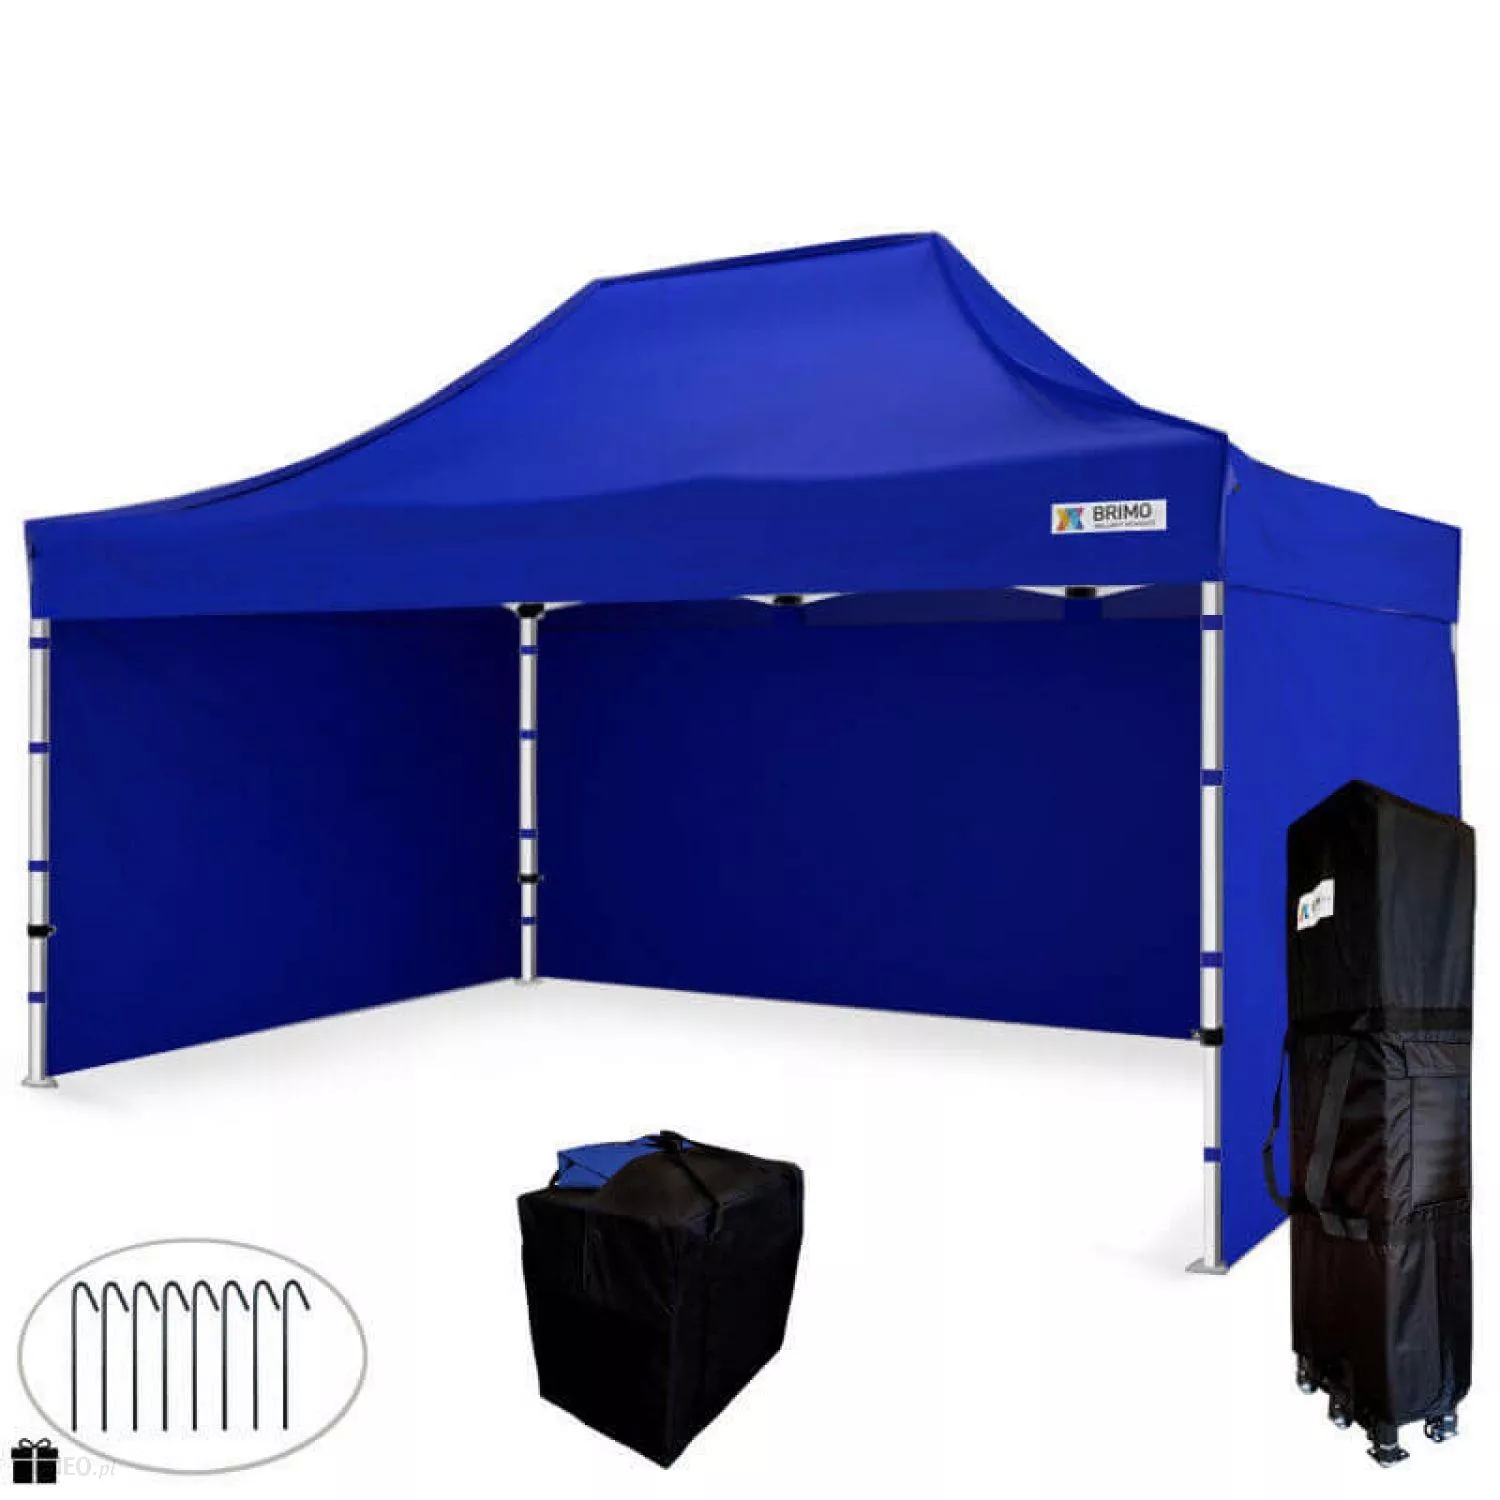 Each advertising tent (namiotreklamowy) is available at the best price post thumbnail image